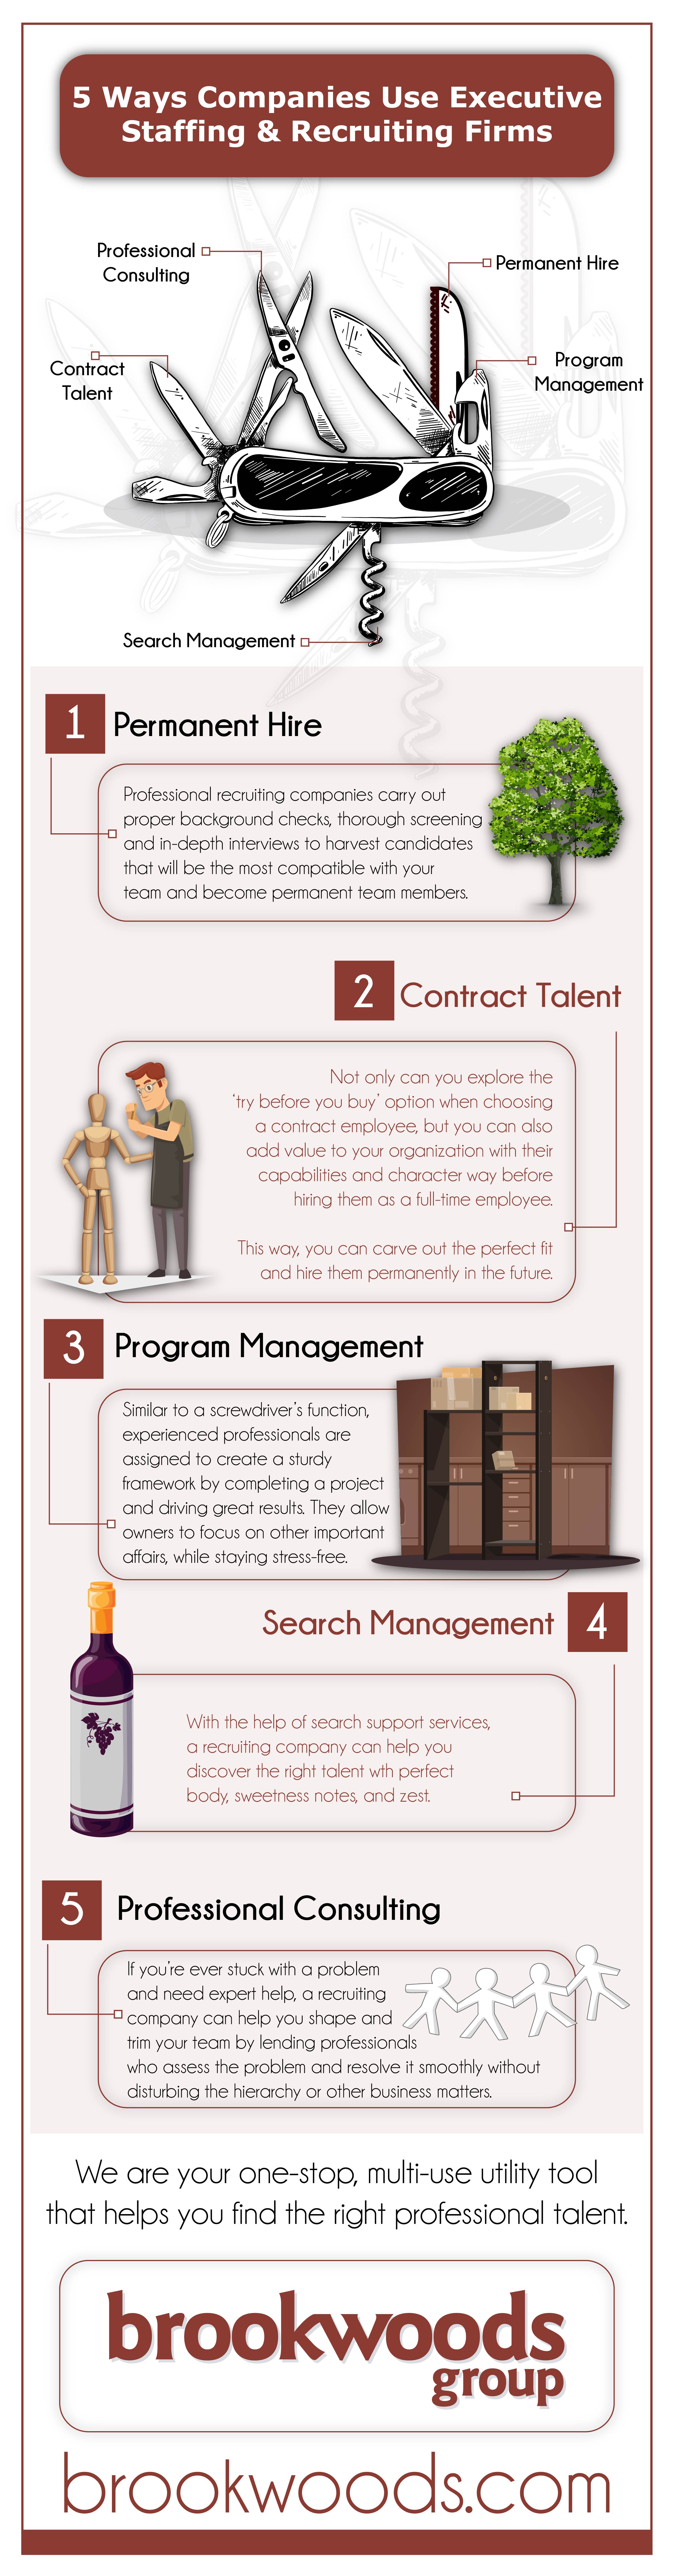  5 Ways Companies Use Executive Staffing & Recruiting Firms